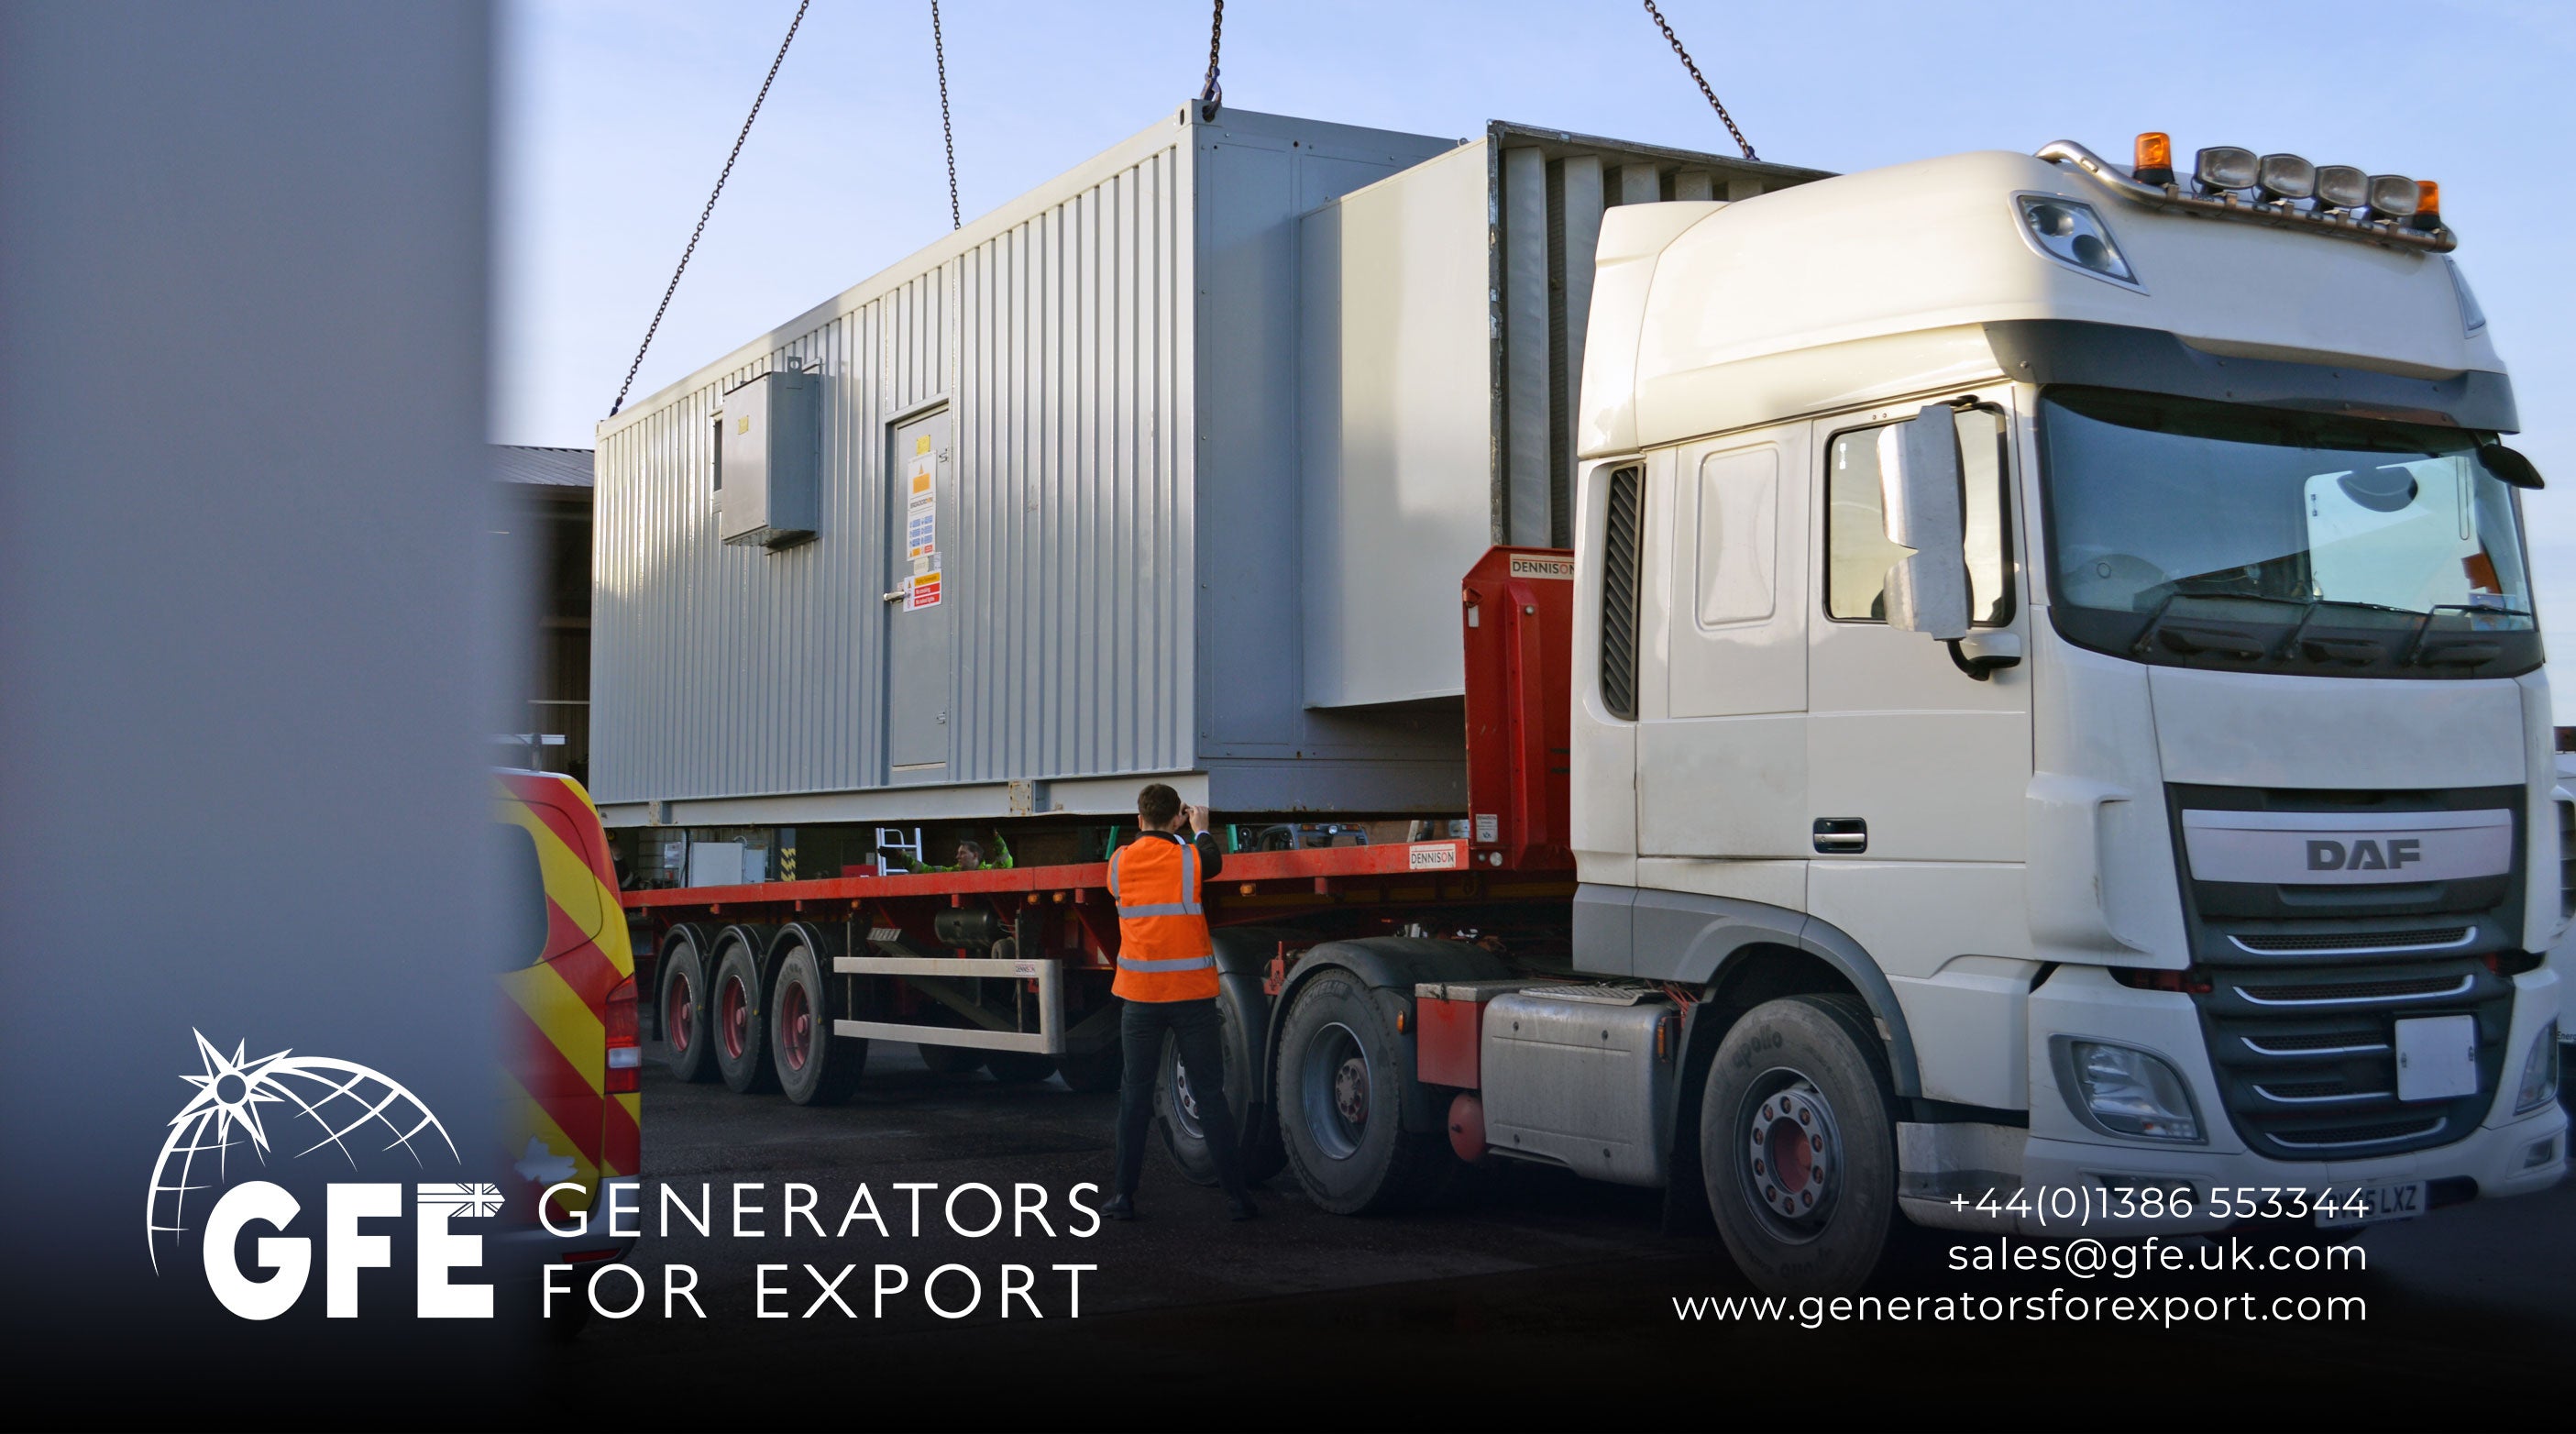 Why should I buy a used generator?